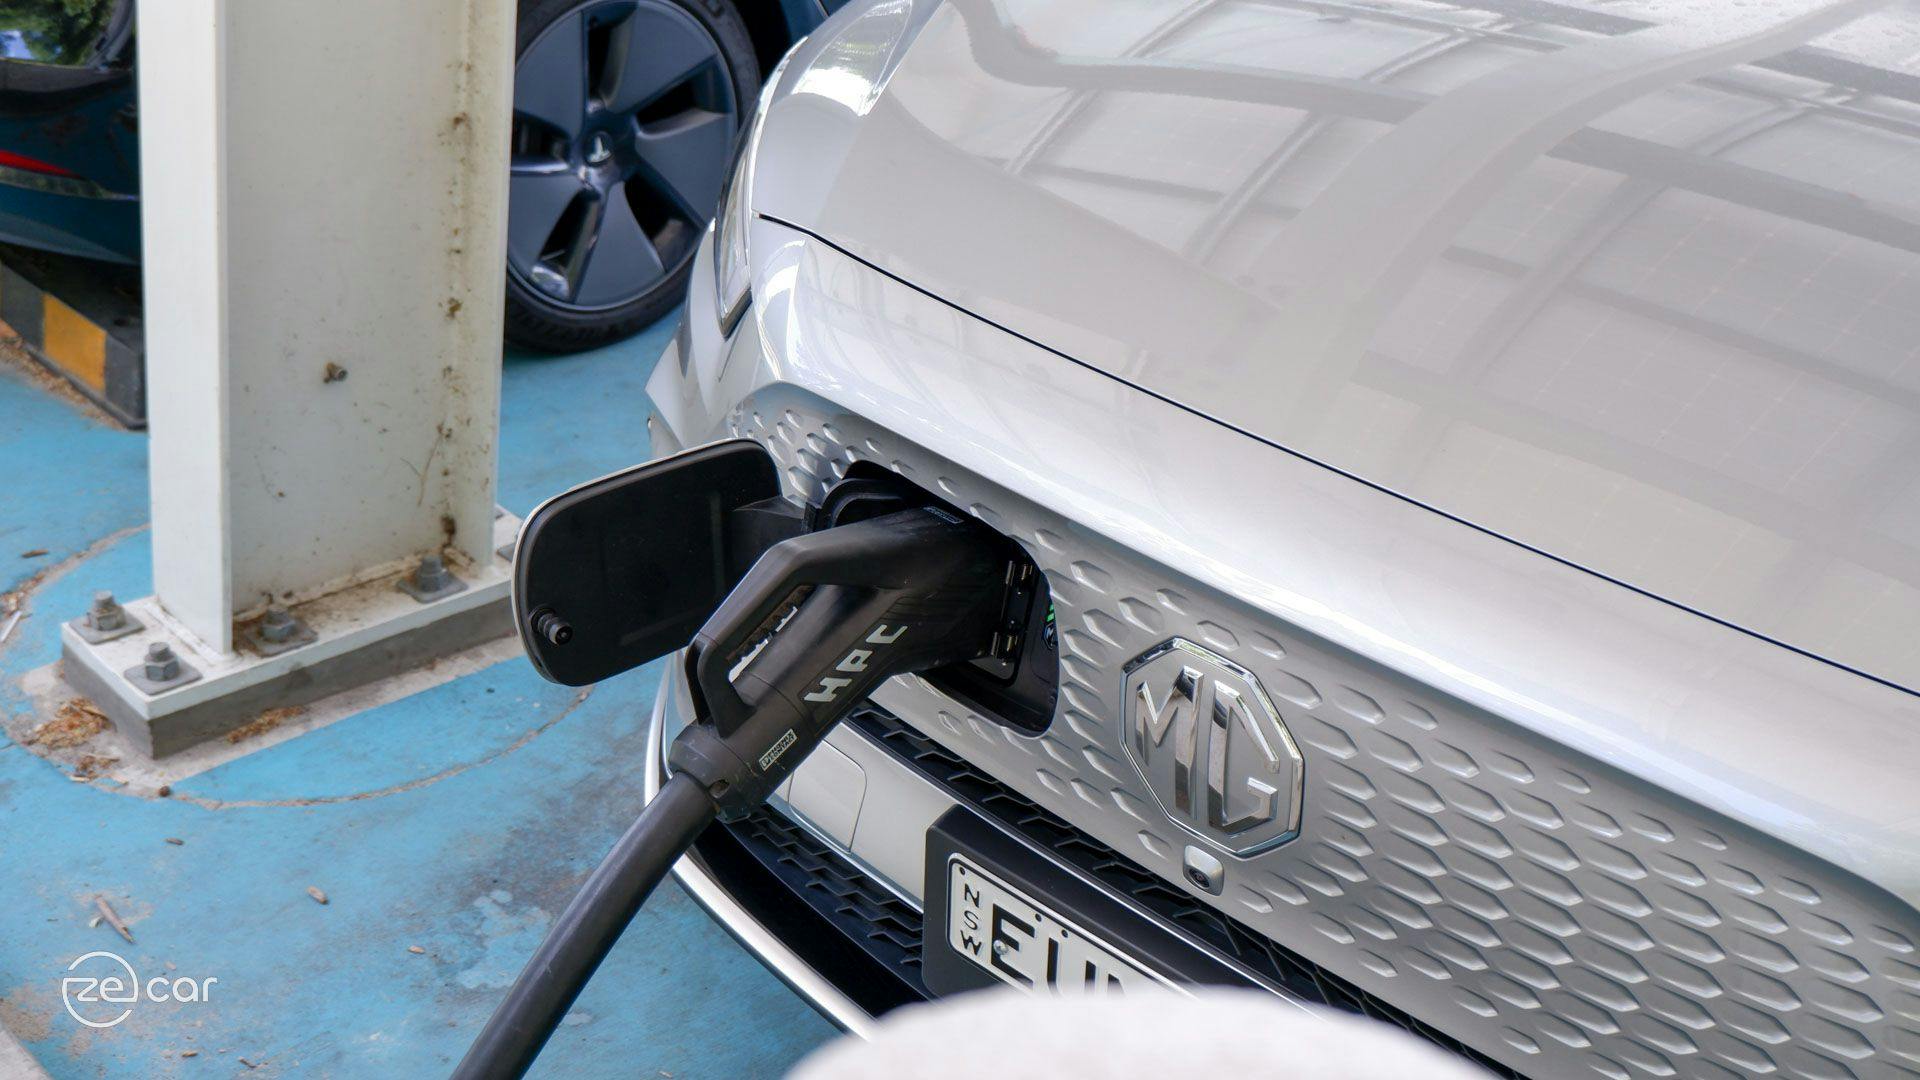 Silver MG ZS EV charging port with Tesla Model 3 behind